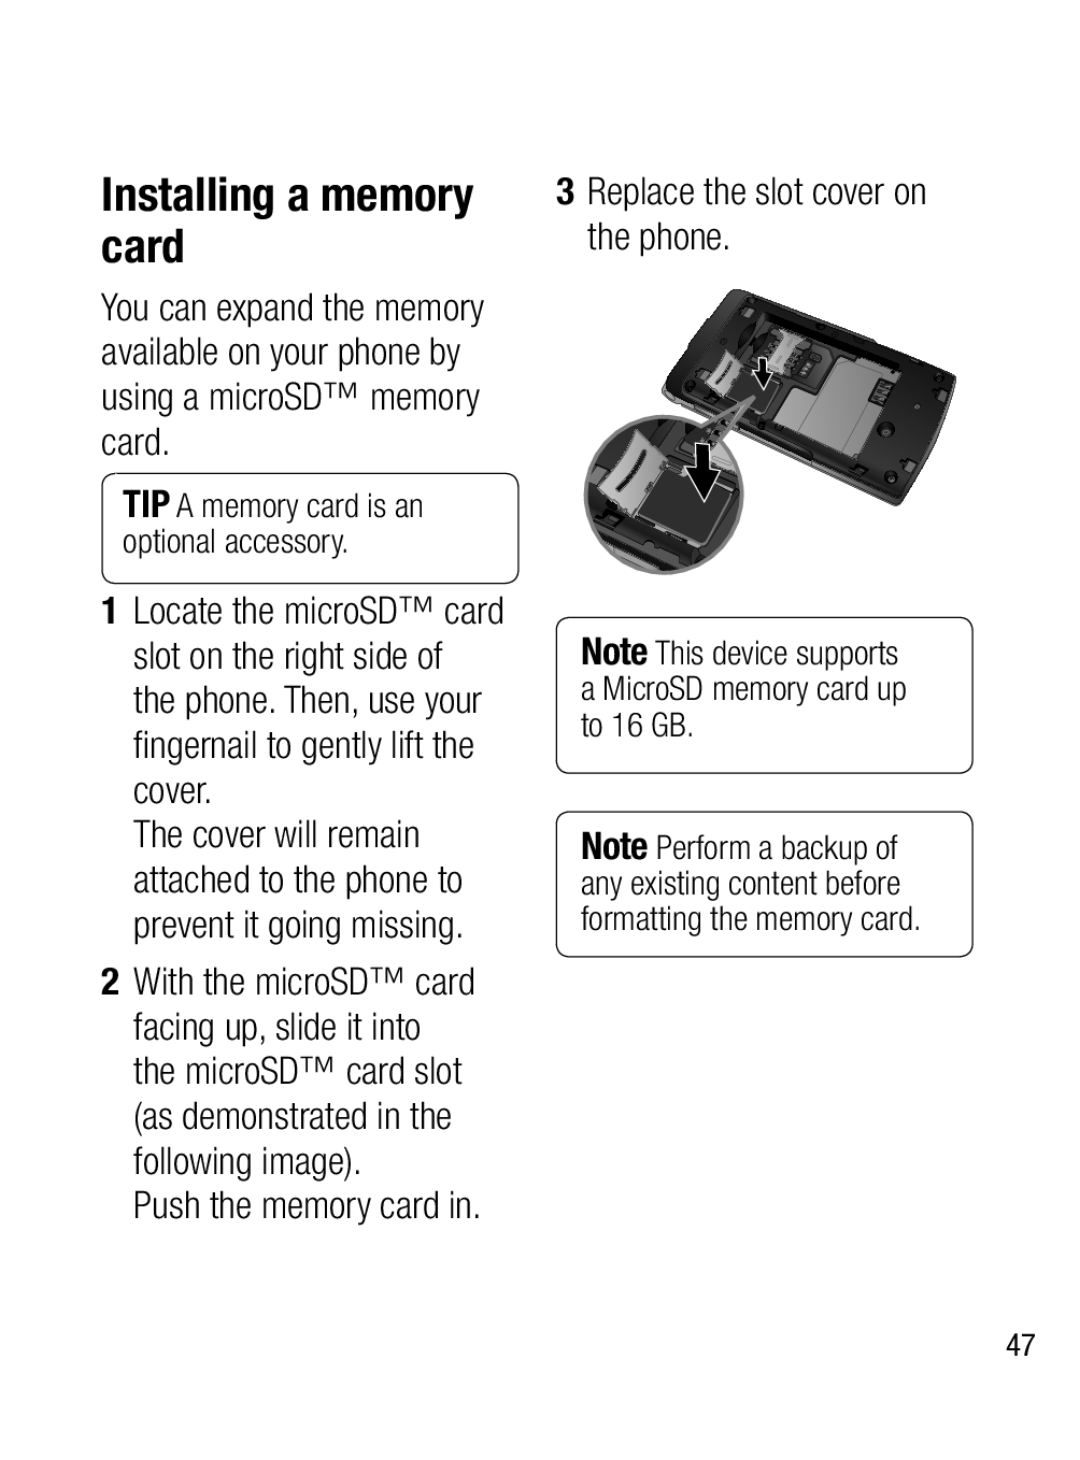 LG Electronics A133CH manual Installing a memory card, Push the memory card in, Replace the slot cover on the phone 